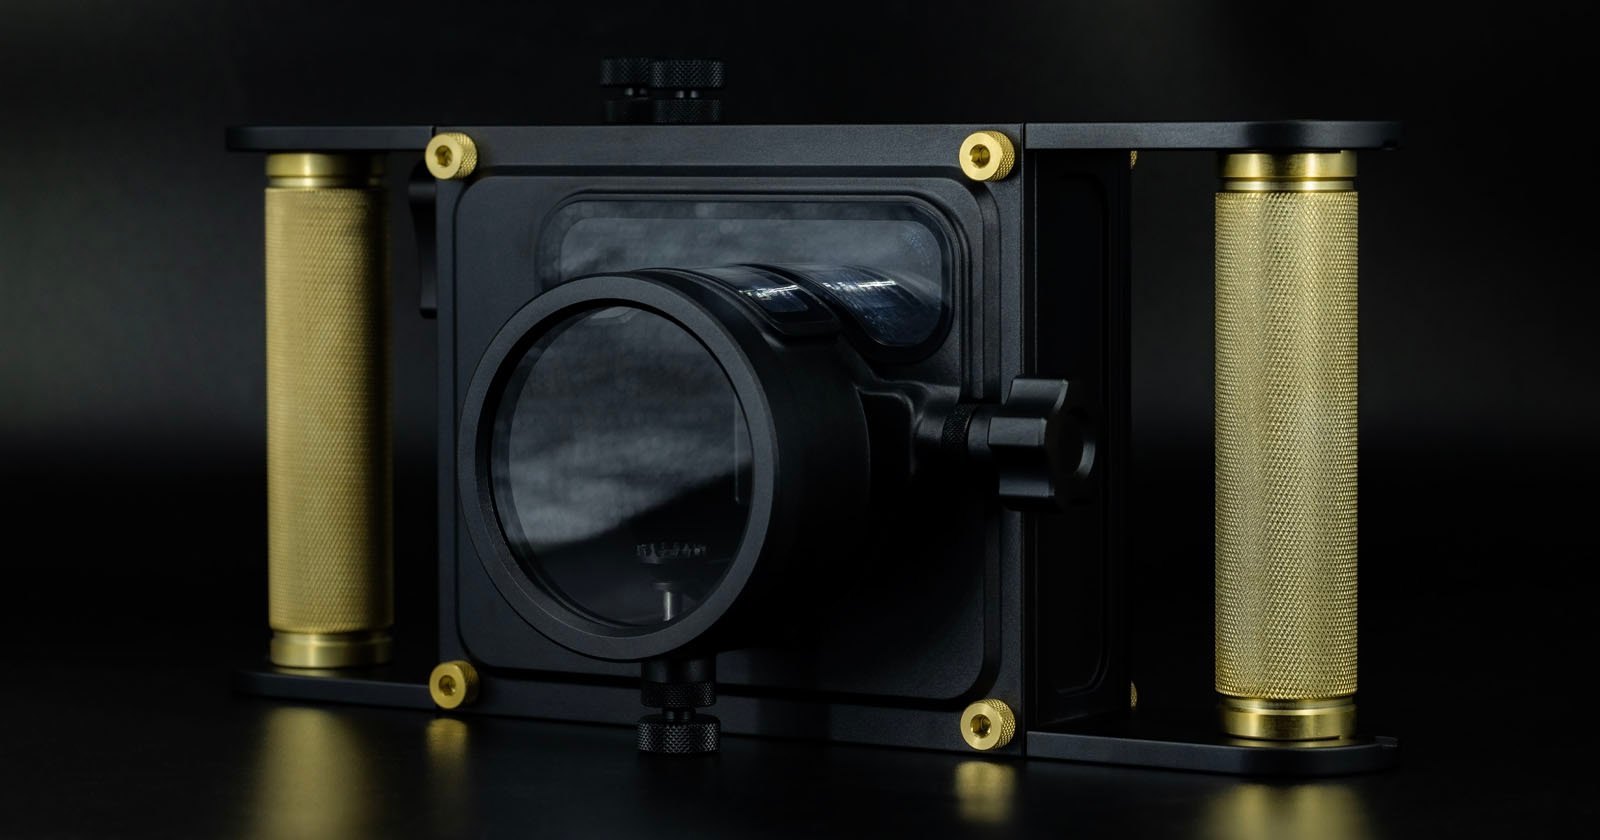 Leica M Series Underwater Housing is First of Its Kind, Costs $6,950